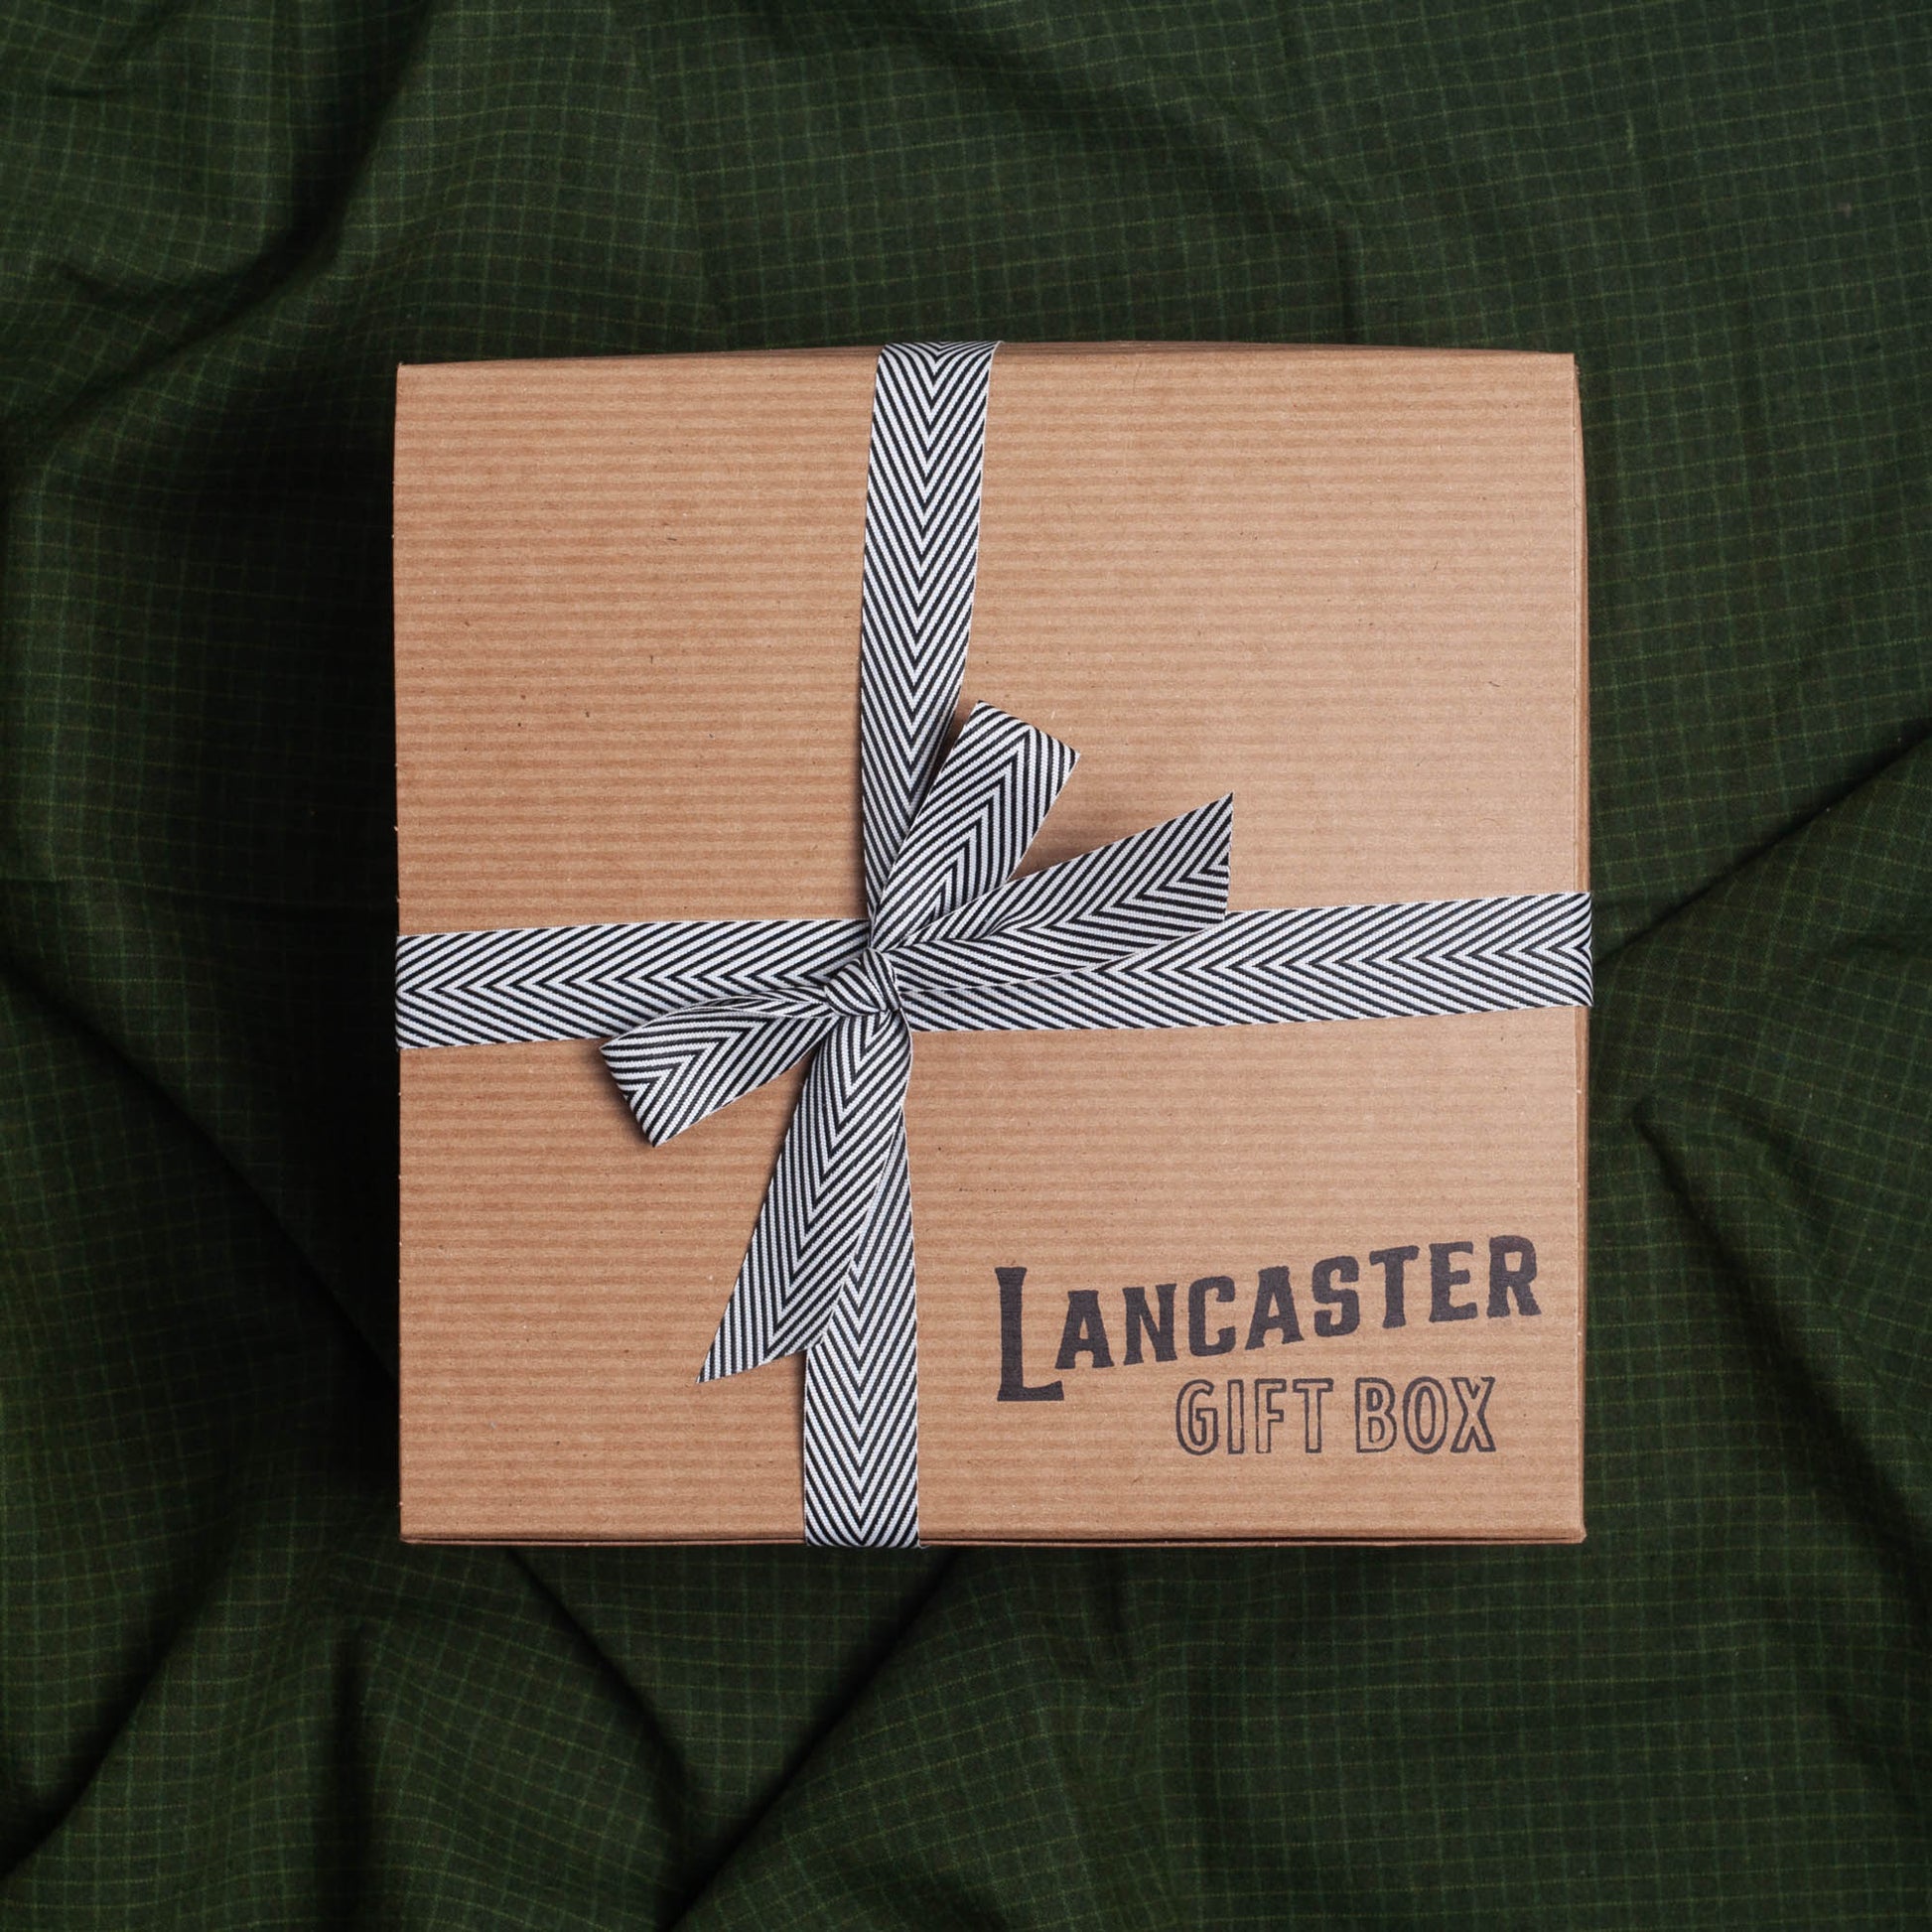 Lancaster Gift Box tied with a black and white bow.